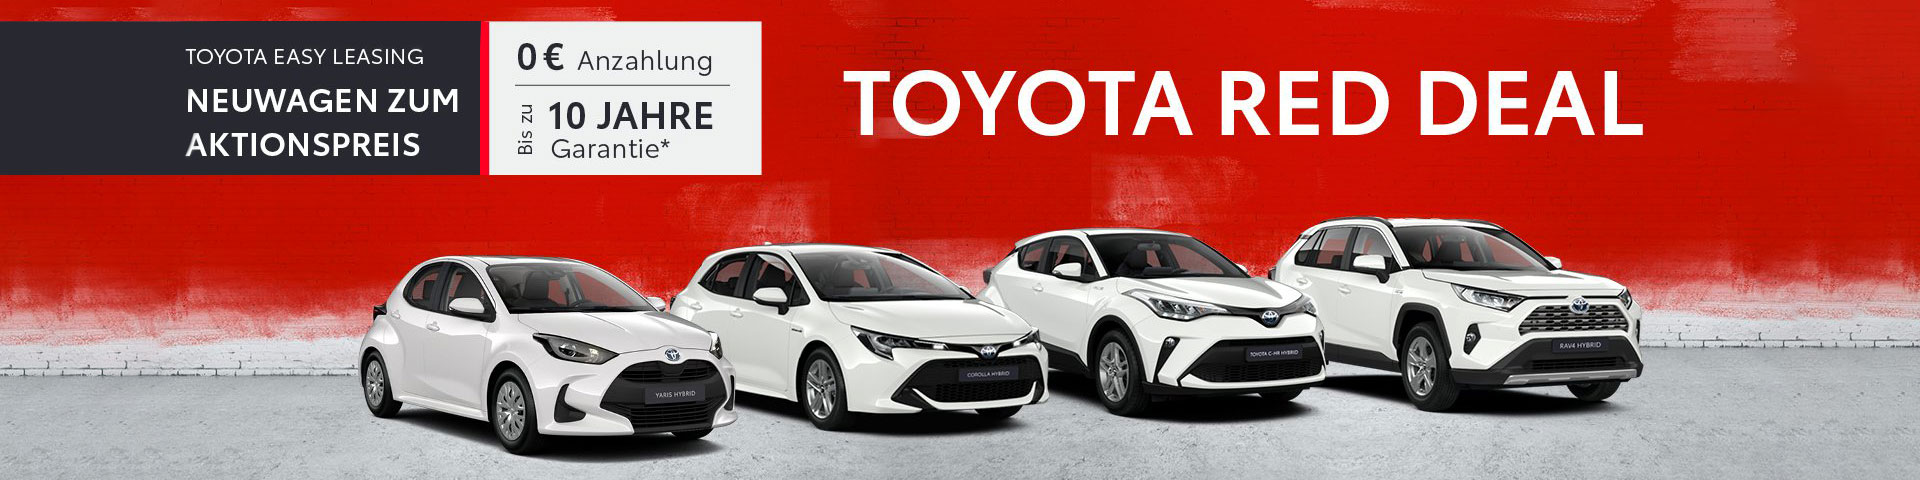 Toyota Red Deal